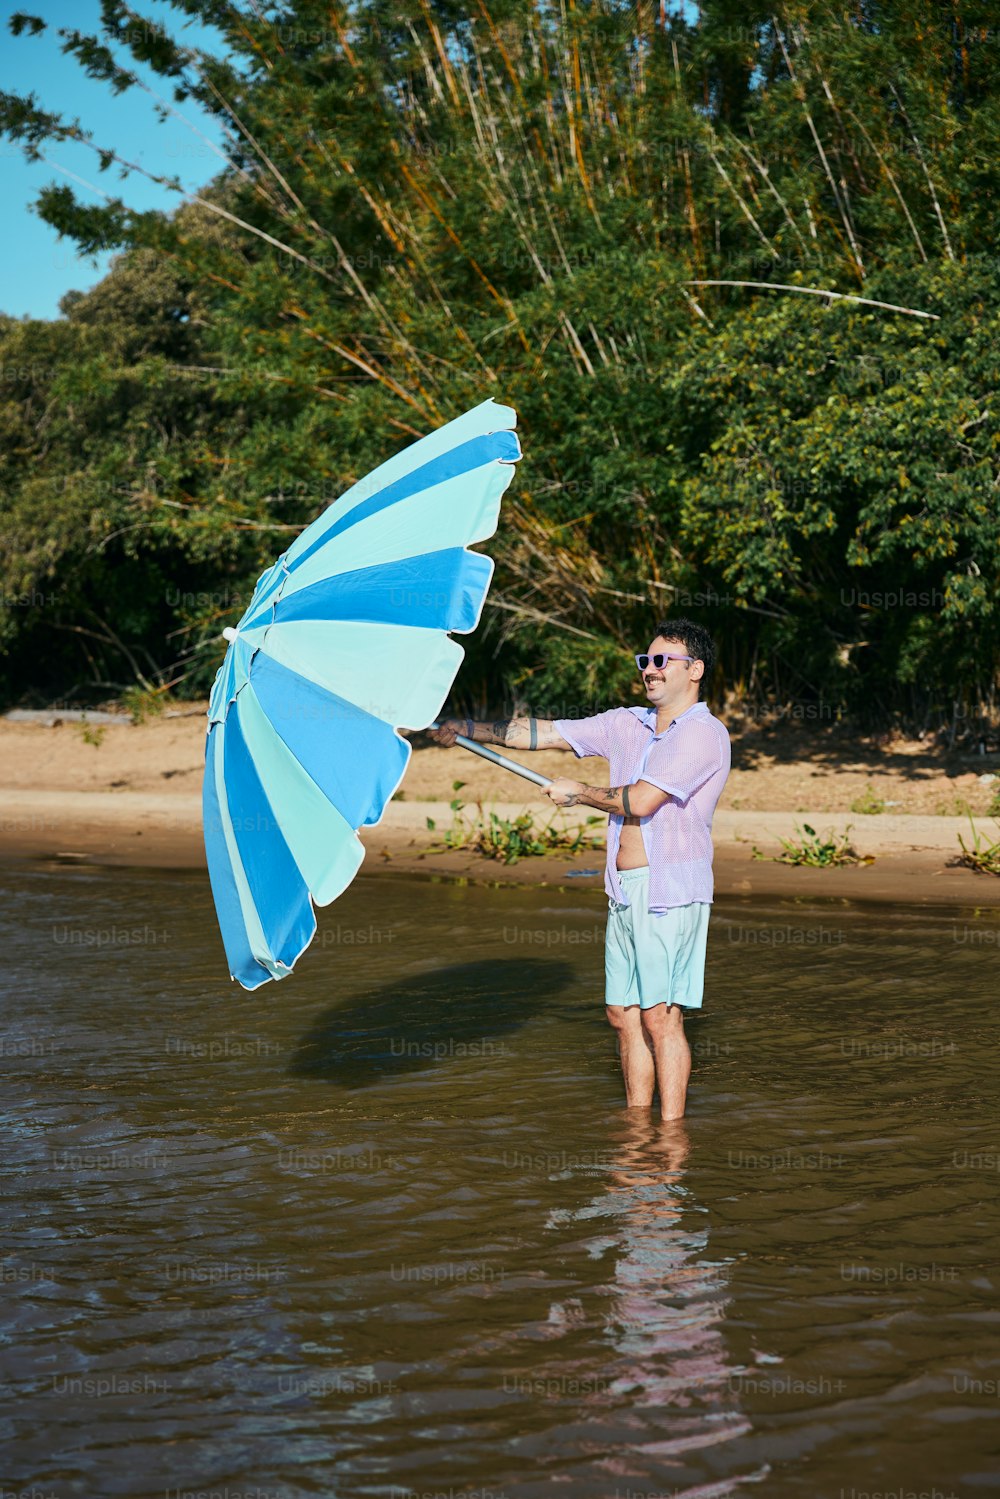 a man standing in the water holding a blue and white umbrella